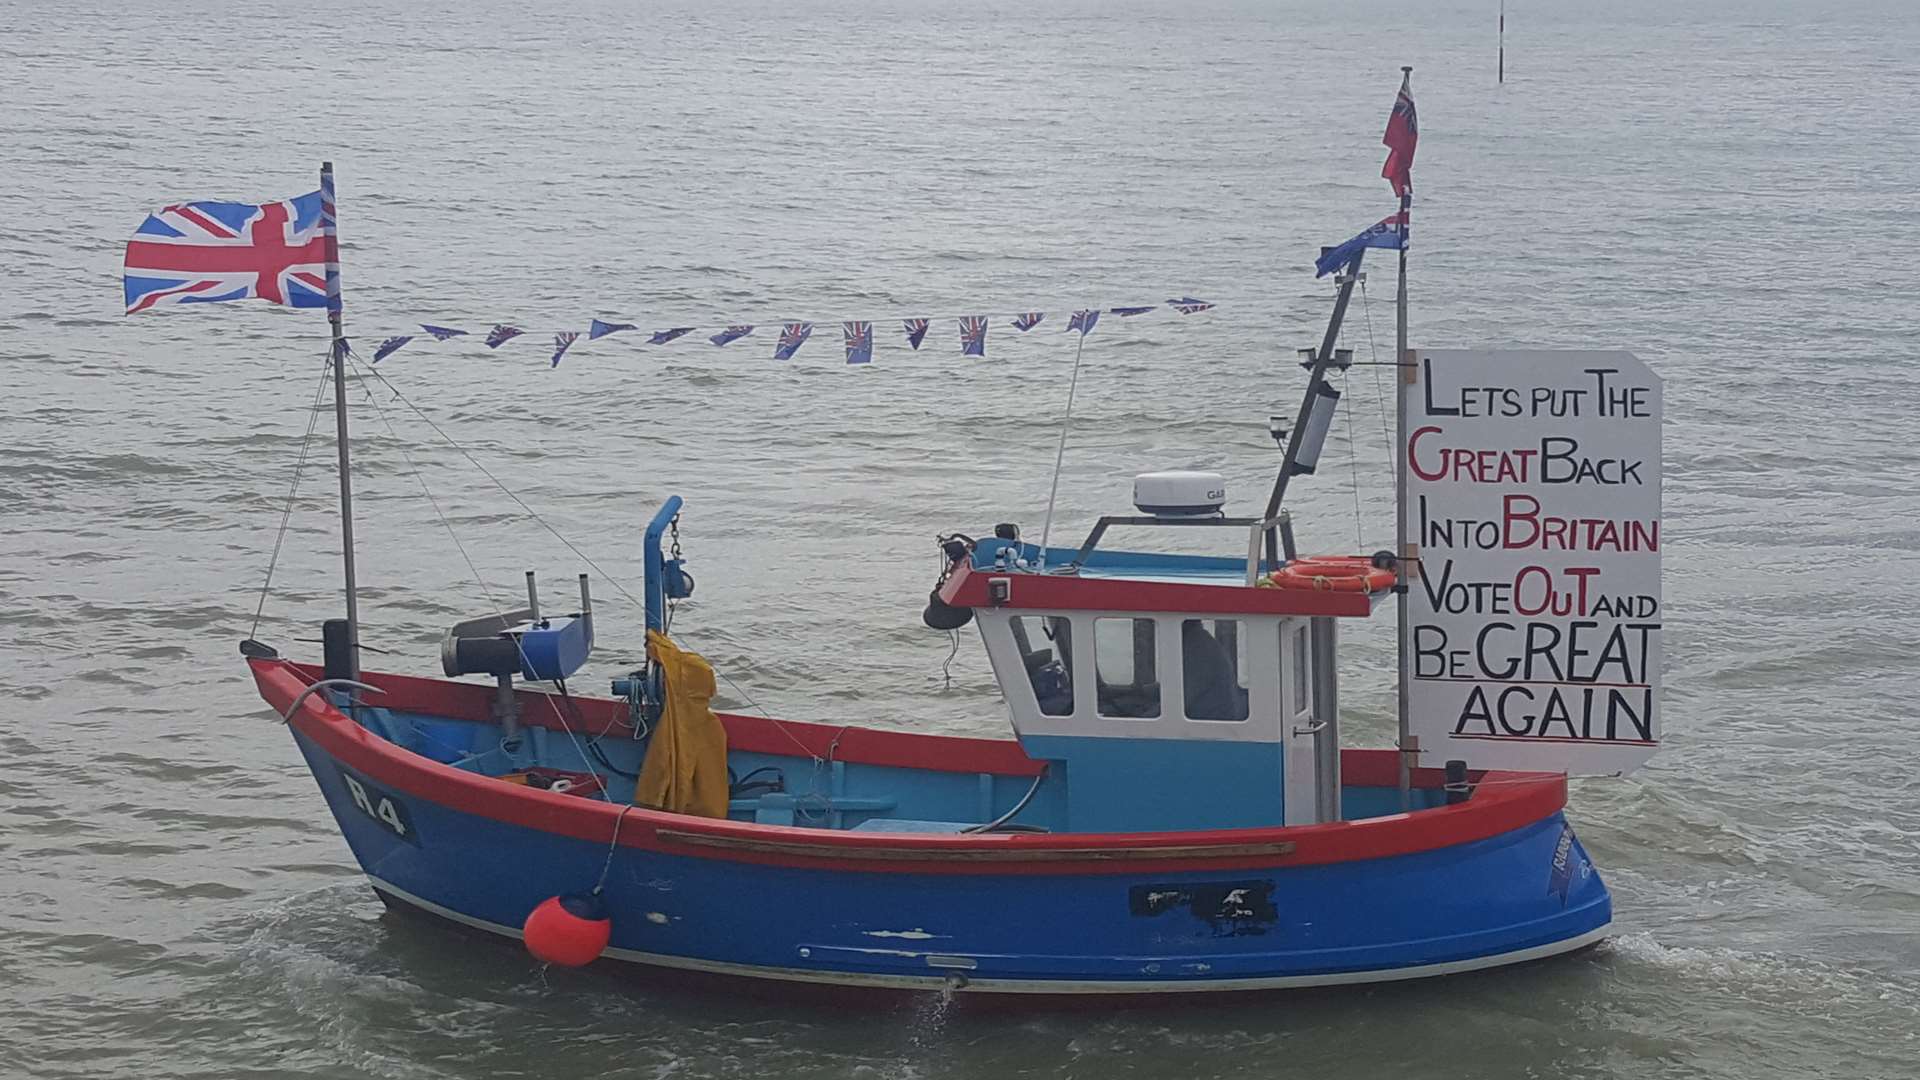 The boat was carrying signs such as 'Let's put the Great back into Britain'